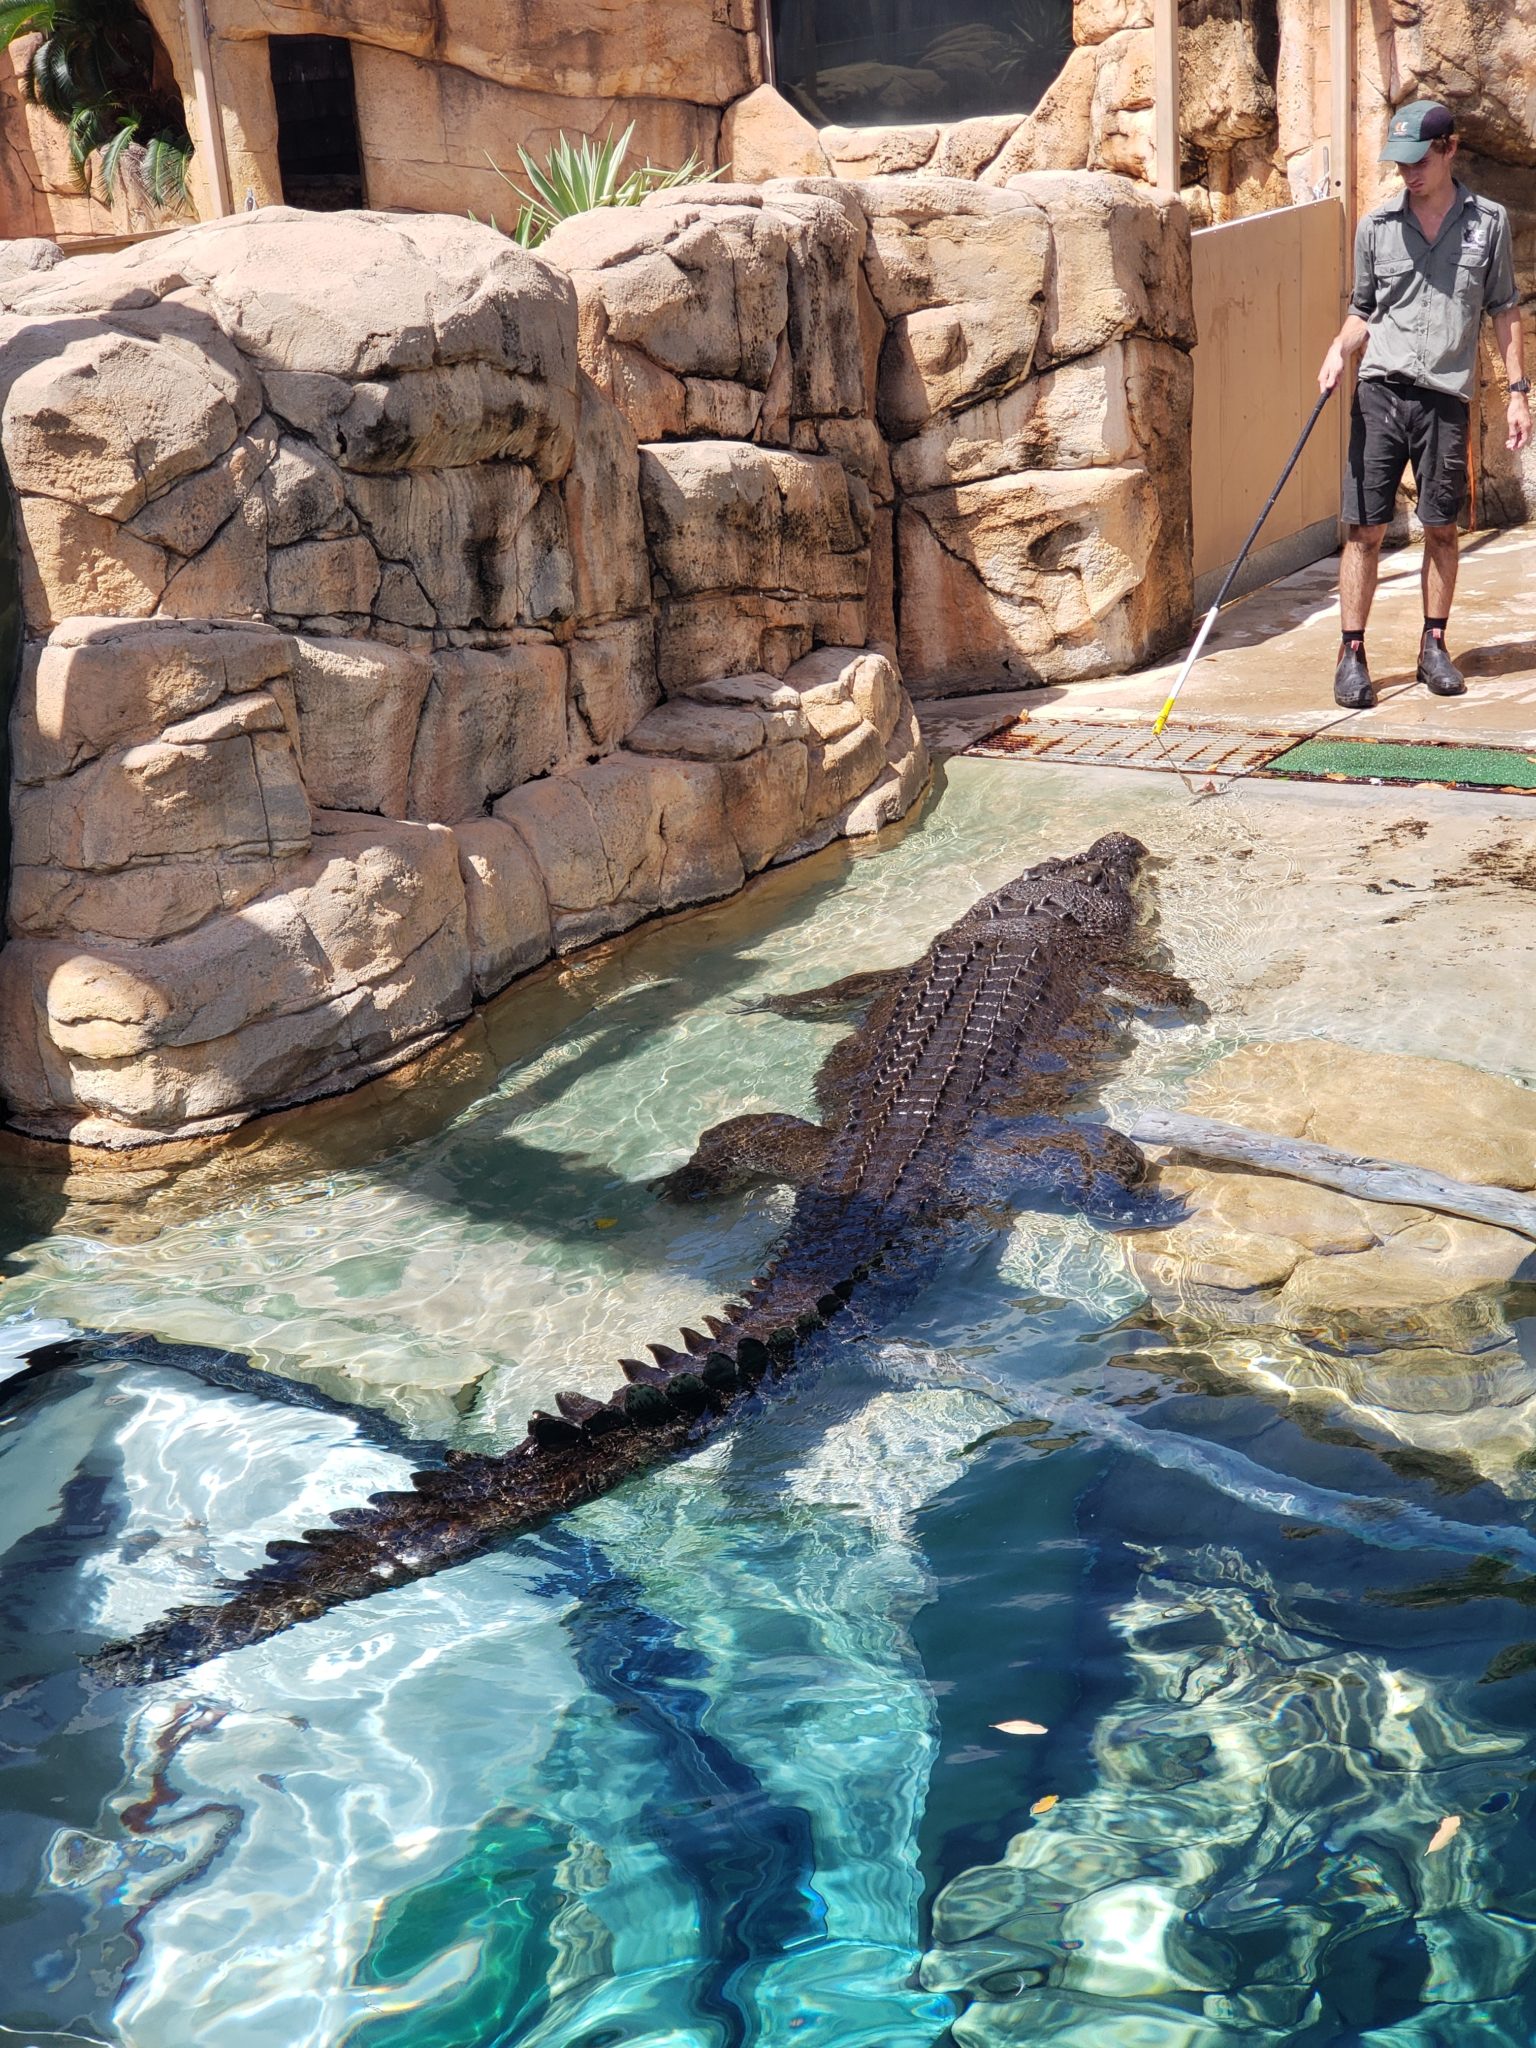 a man walking with a large alligator in a pool